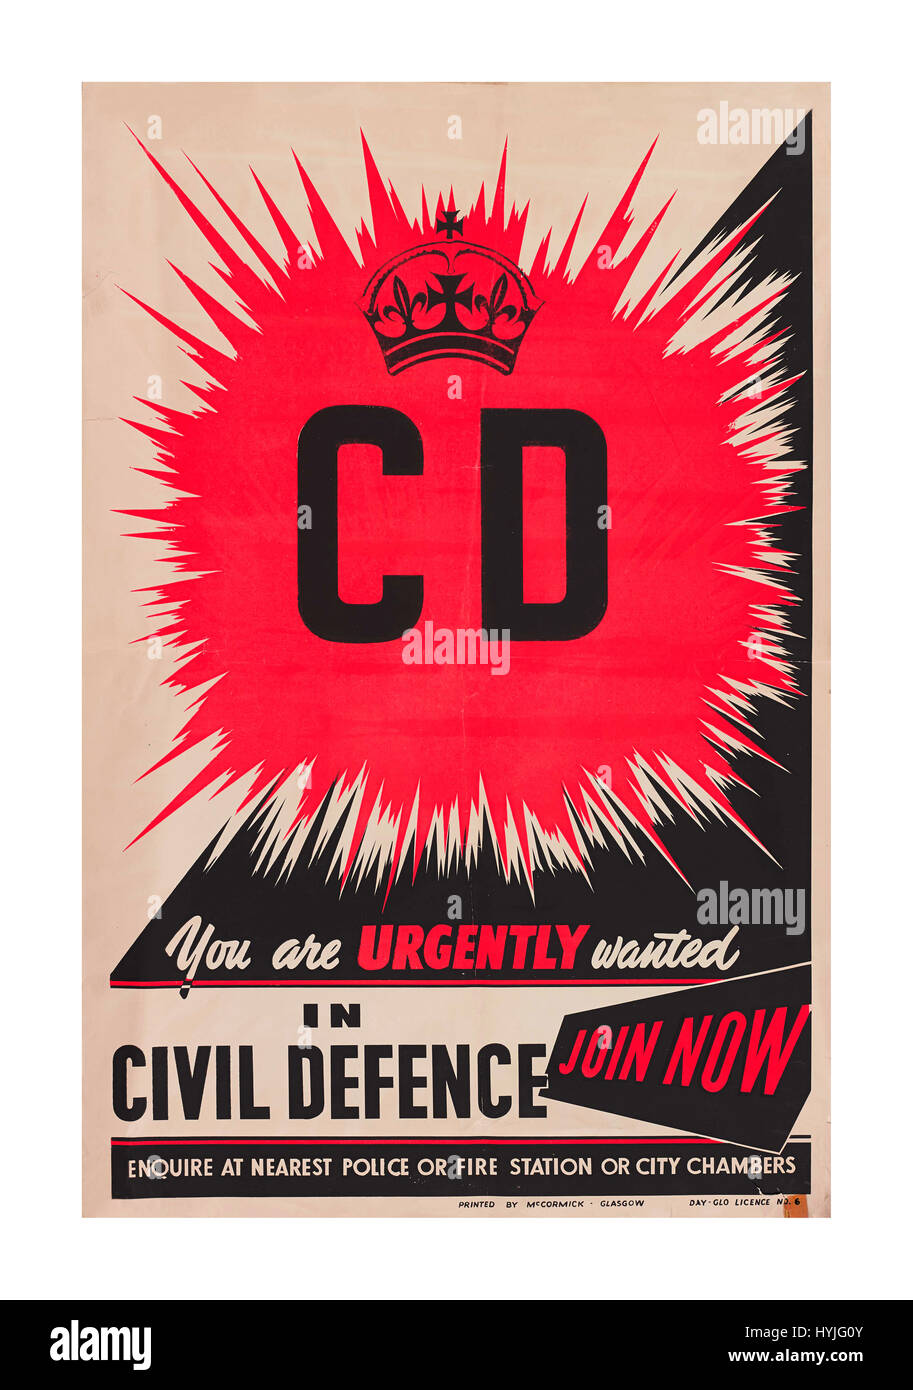 UK CIVIL DEFENCE WW2 World War 2 UK Propaganda poster appealing urgently for people to join the Civil Defence   'Join Now' 'You are urgently wanted' Stock Photo